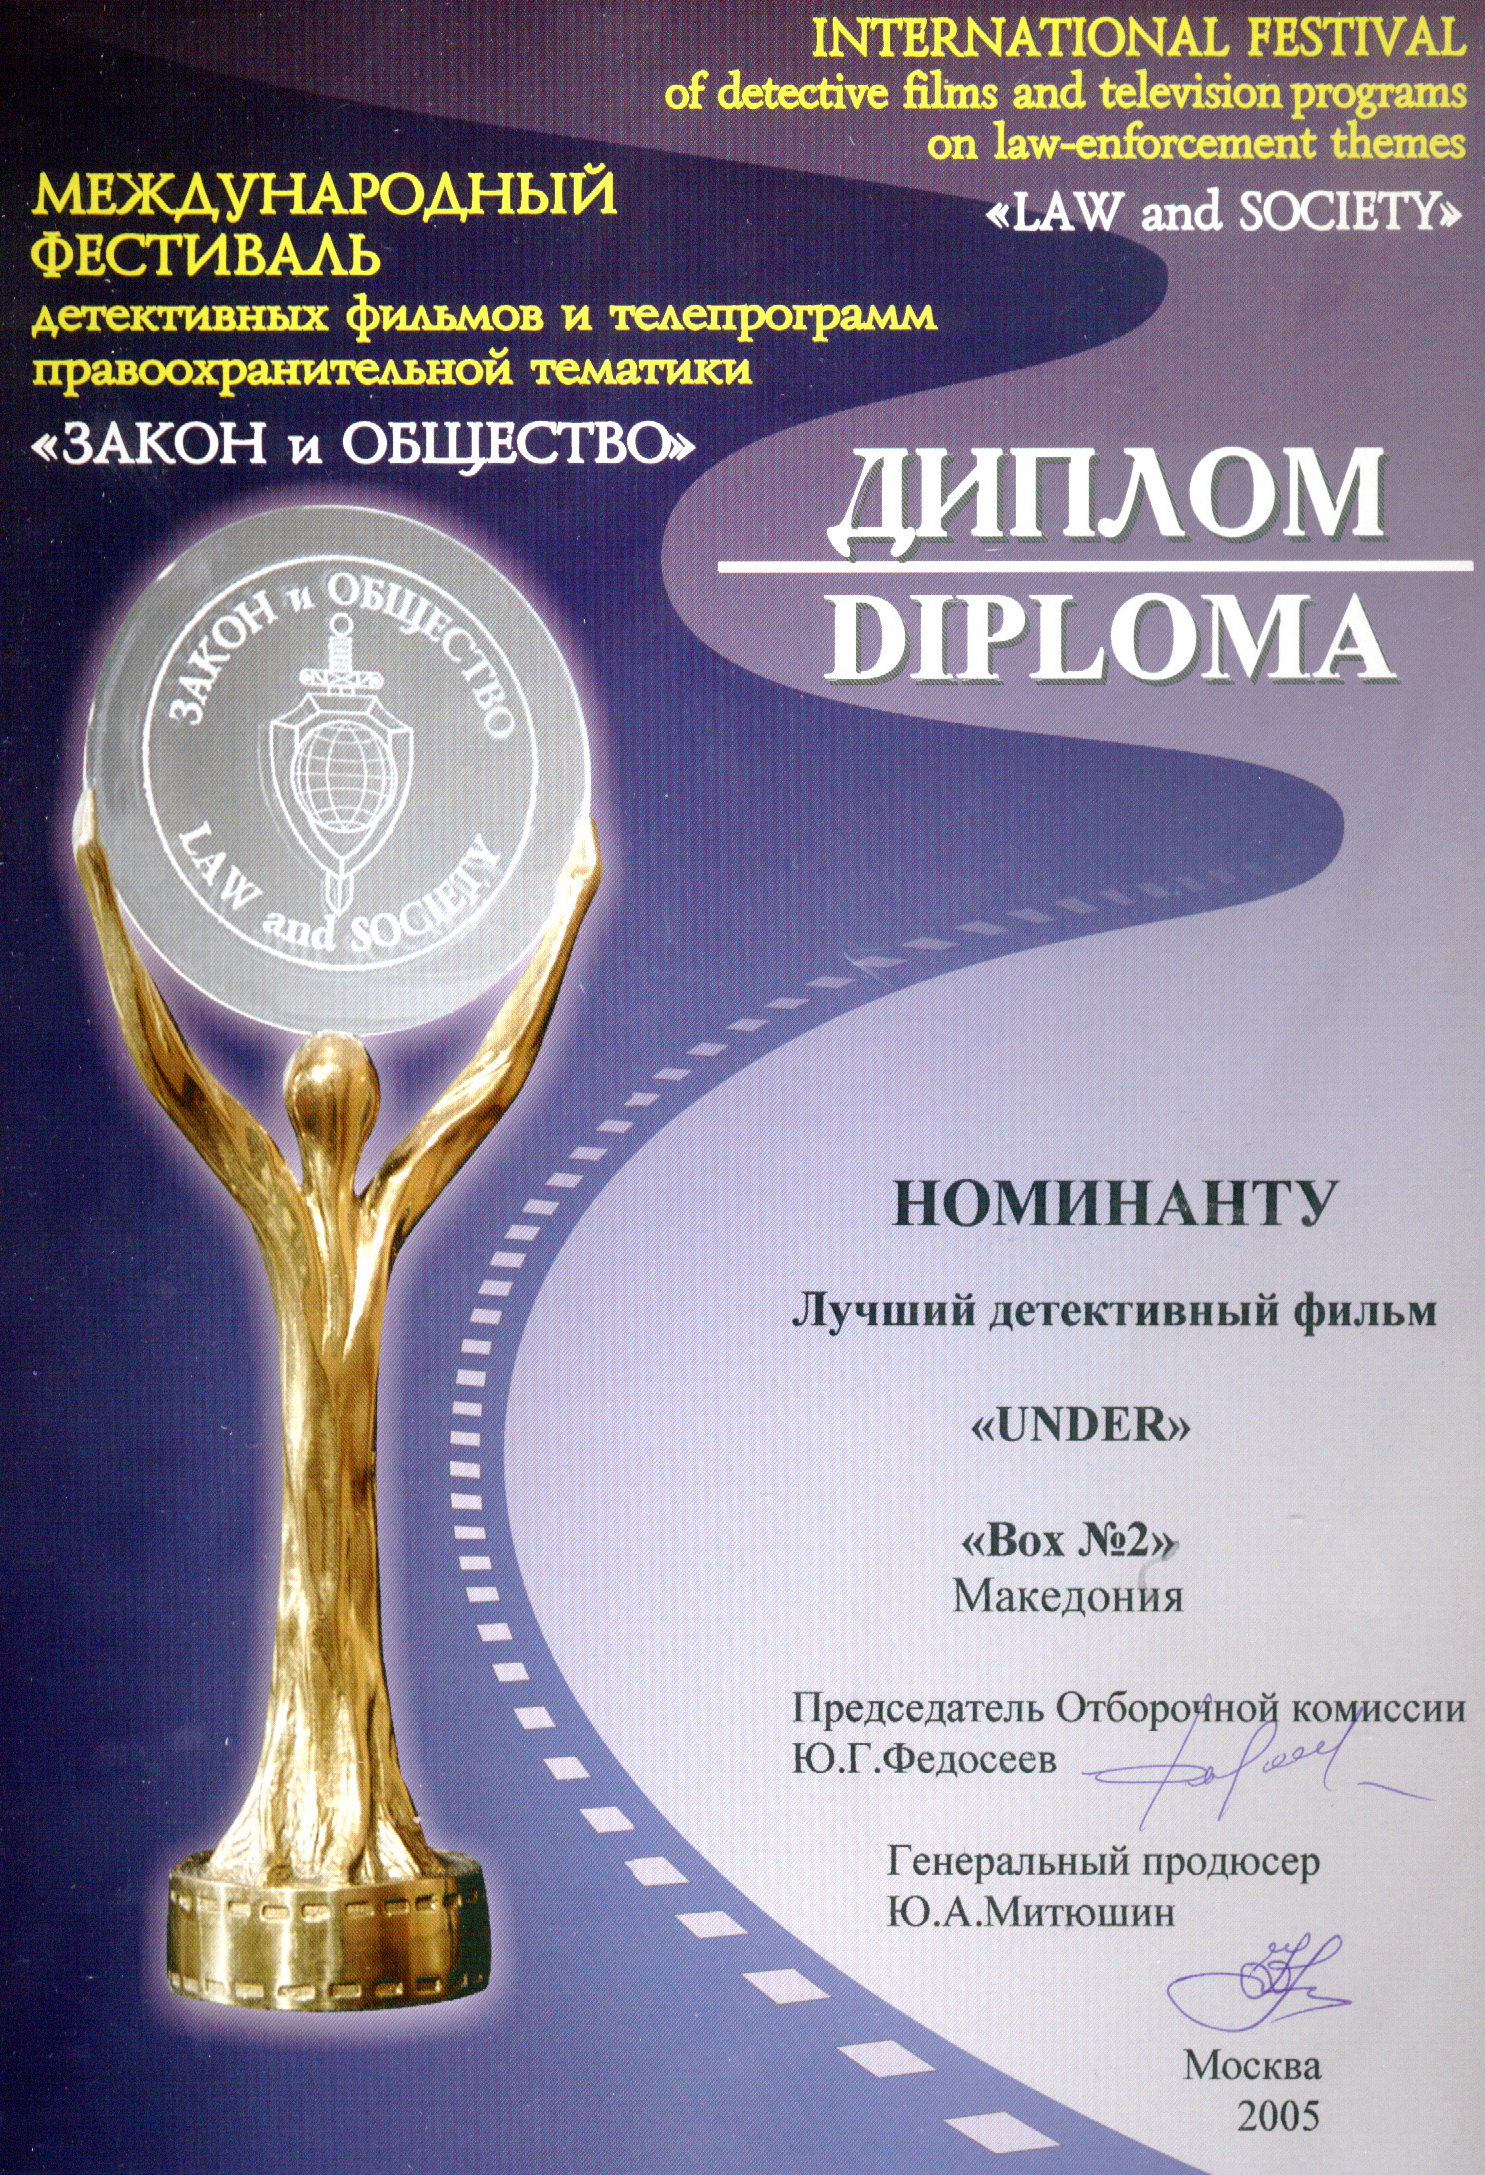 photos of Diploma for UNDER